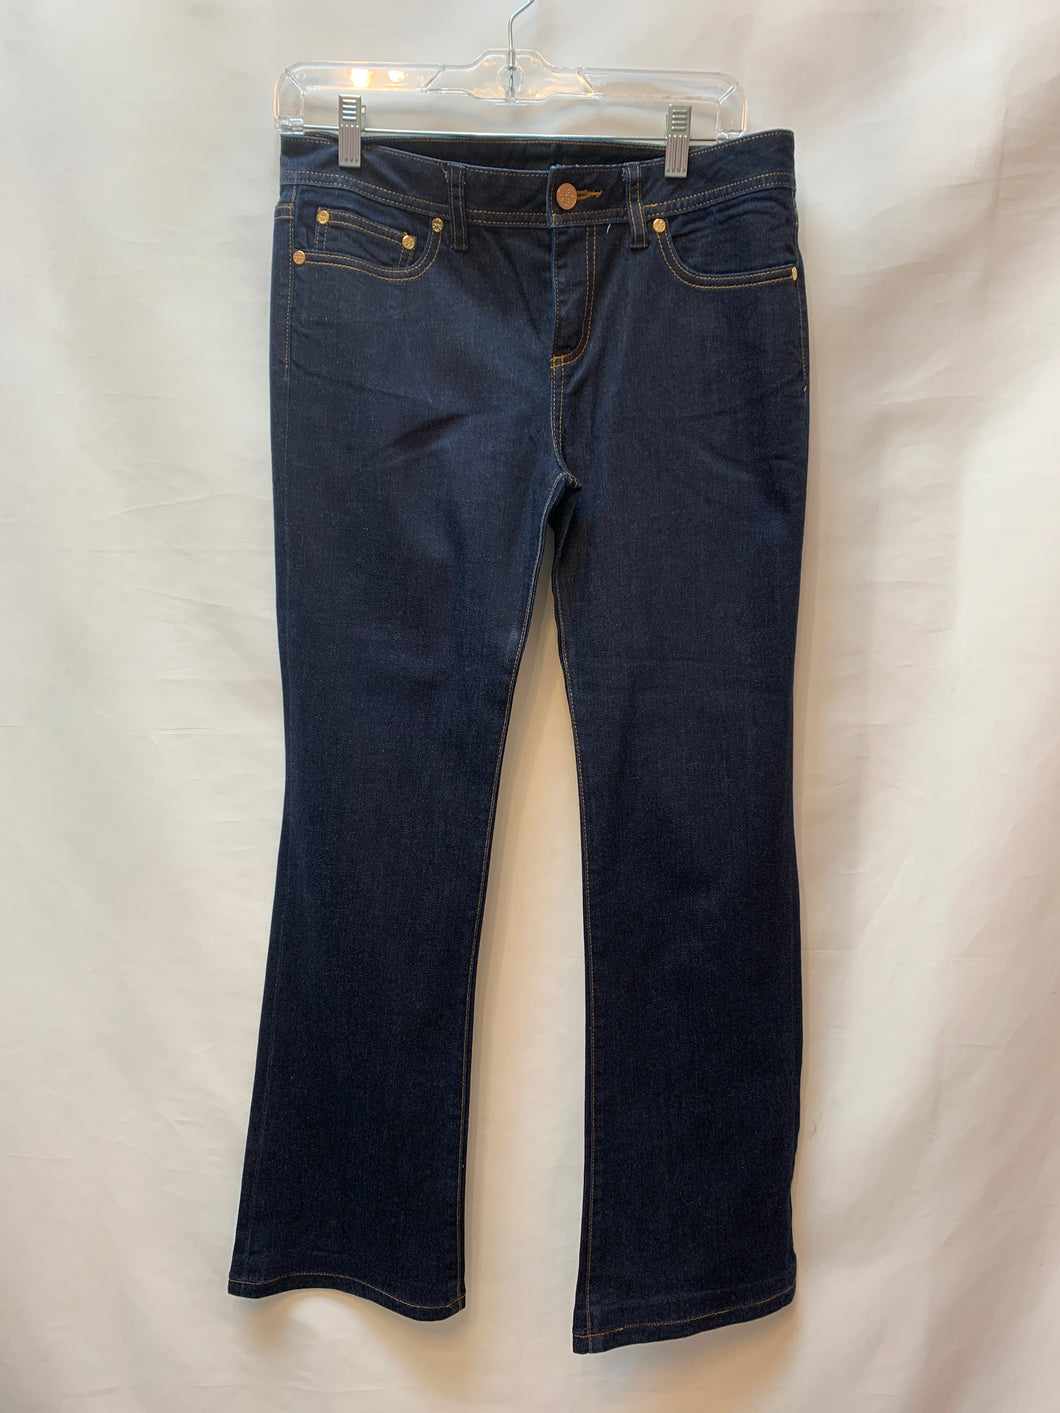 SIZE 6 TORY BURCH Jeans